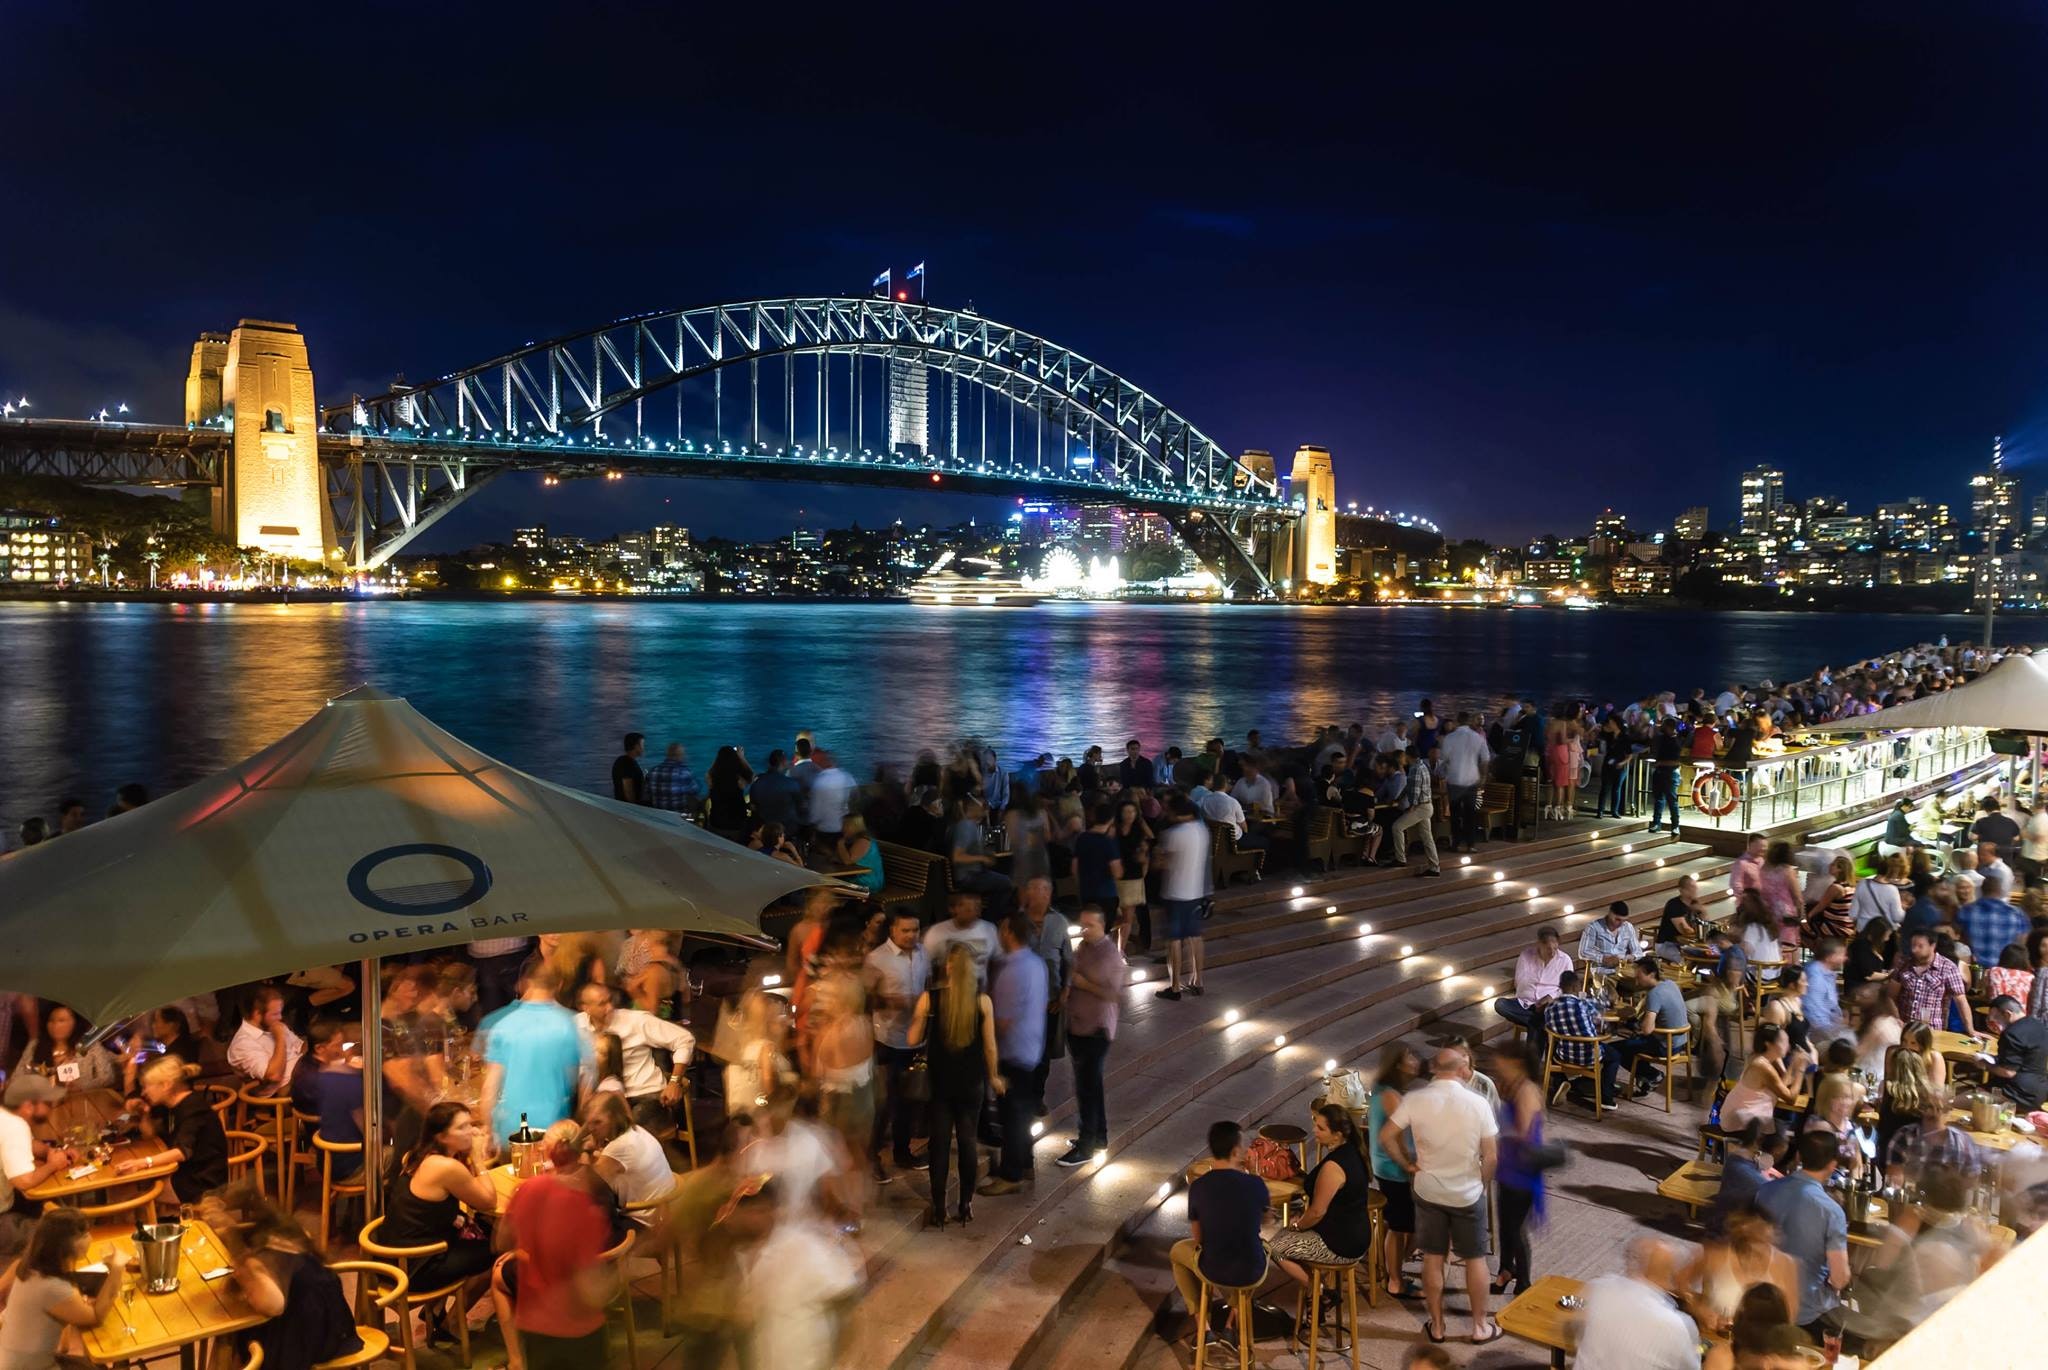 People sitting and standing near bridge during nighttime photo